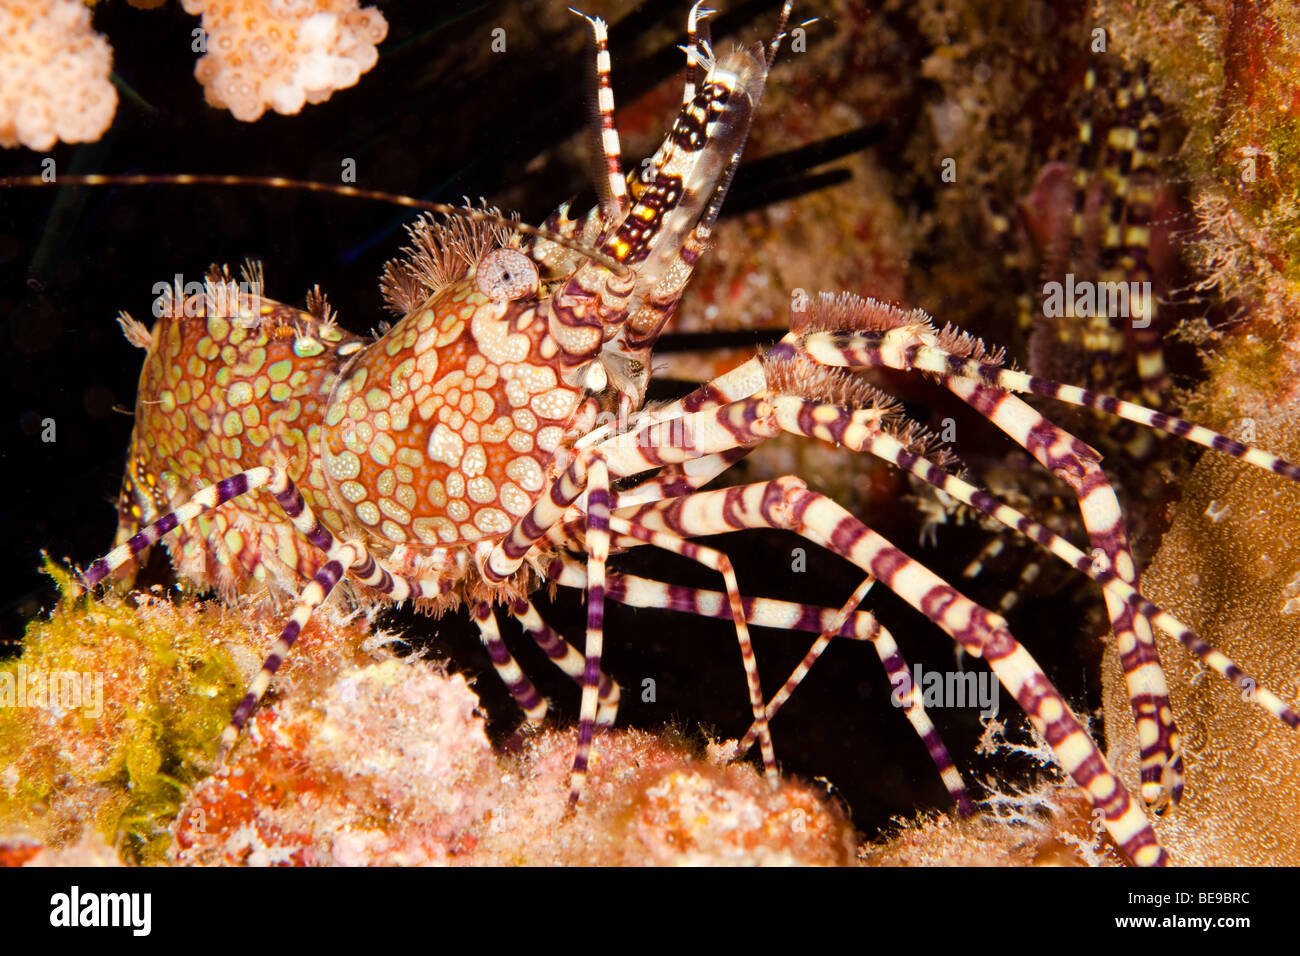 This male marbled shrimp, Saron marmoratus, shows it's elongated claws and tufts of bristles. Hawaii. Stock Photo